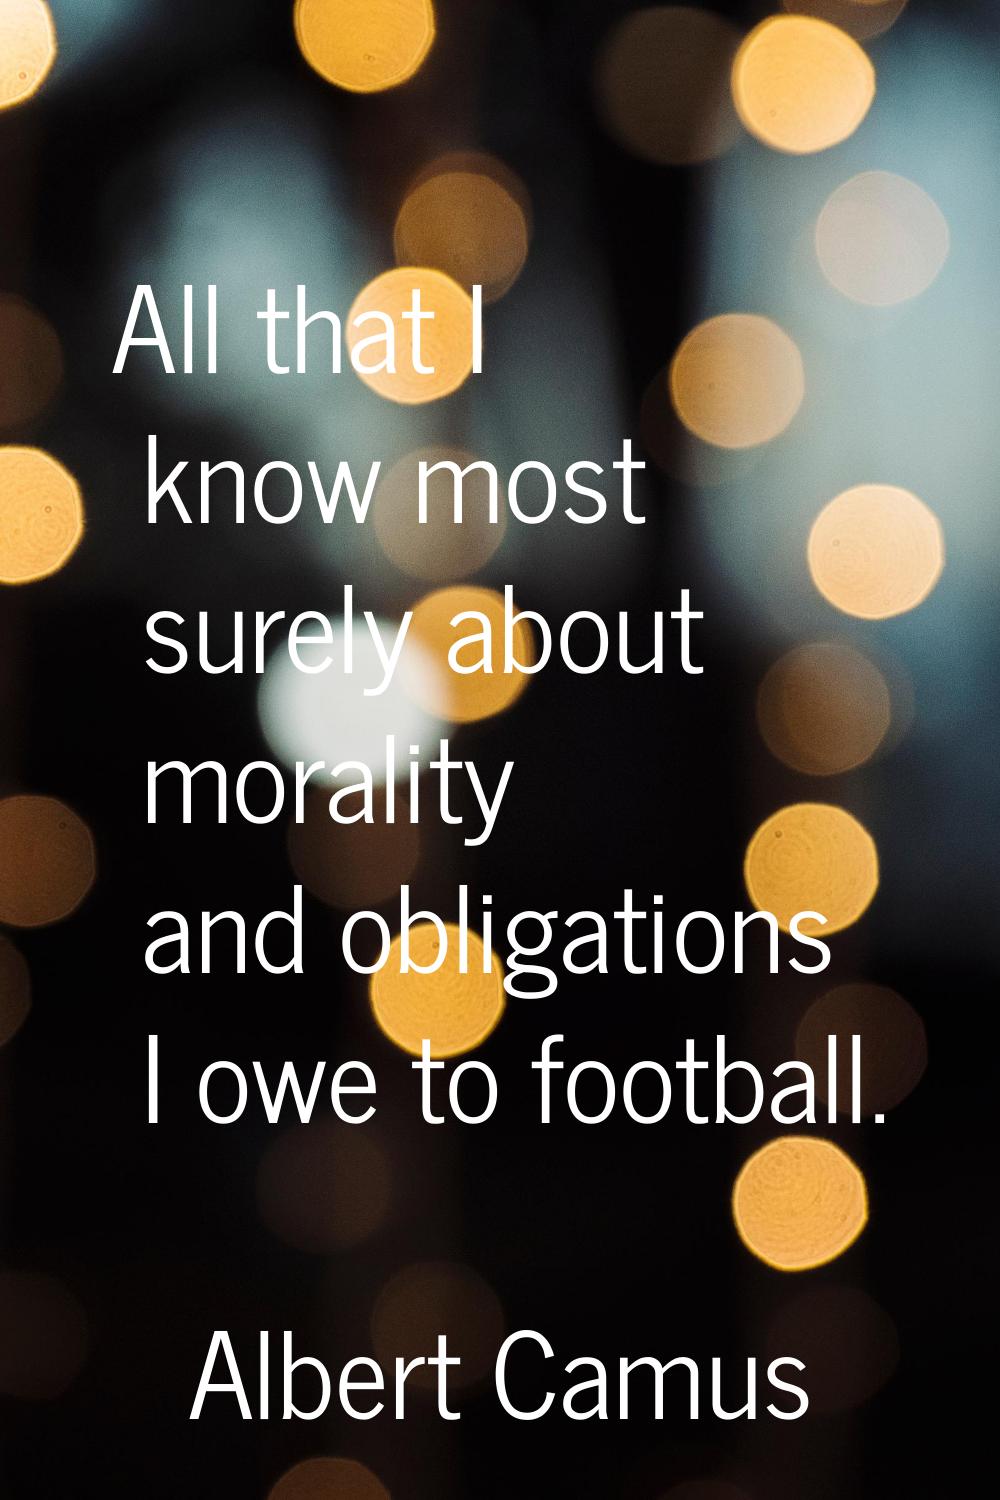 All that I know most surely about morality and obligations I owe to football.